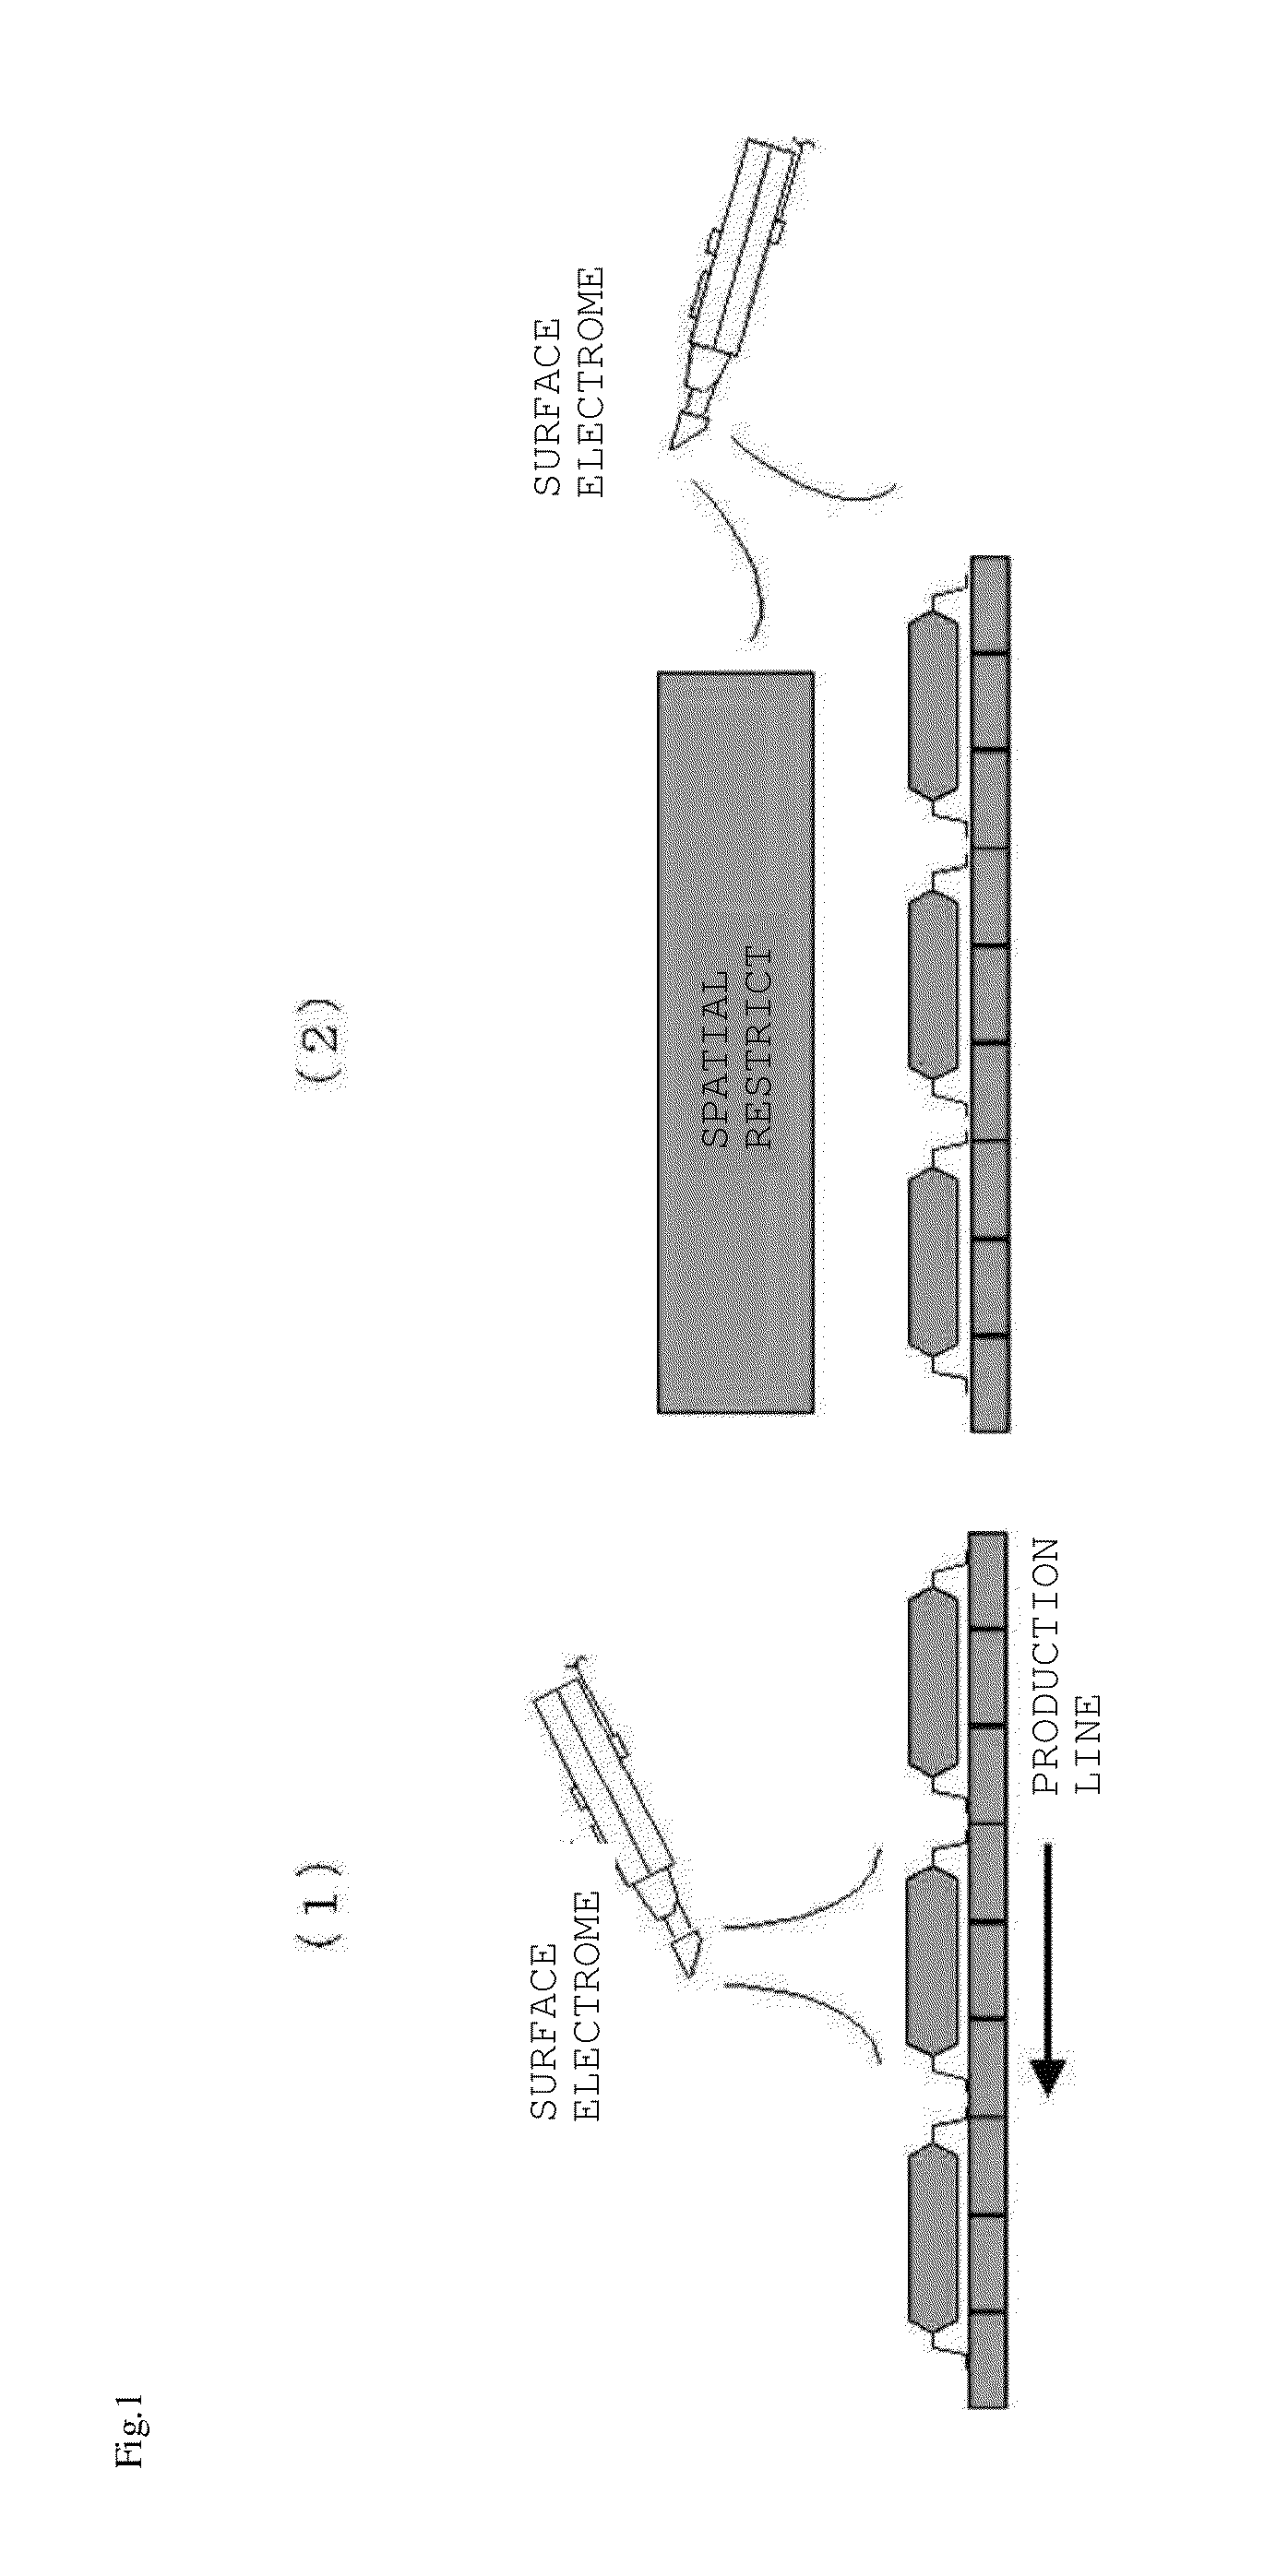 Static-electricity electrification measurement method and apparatus